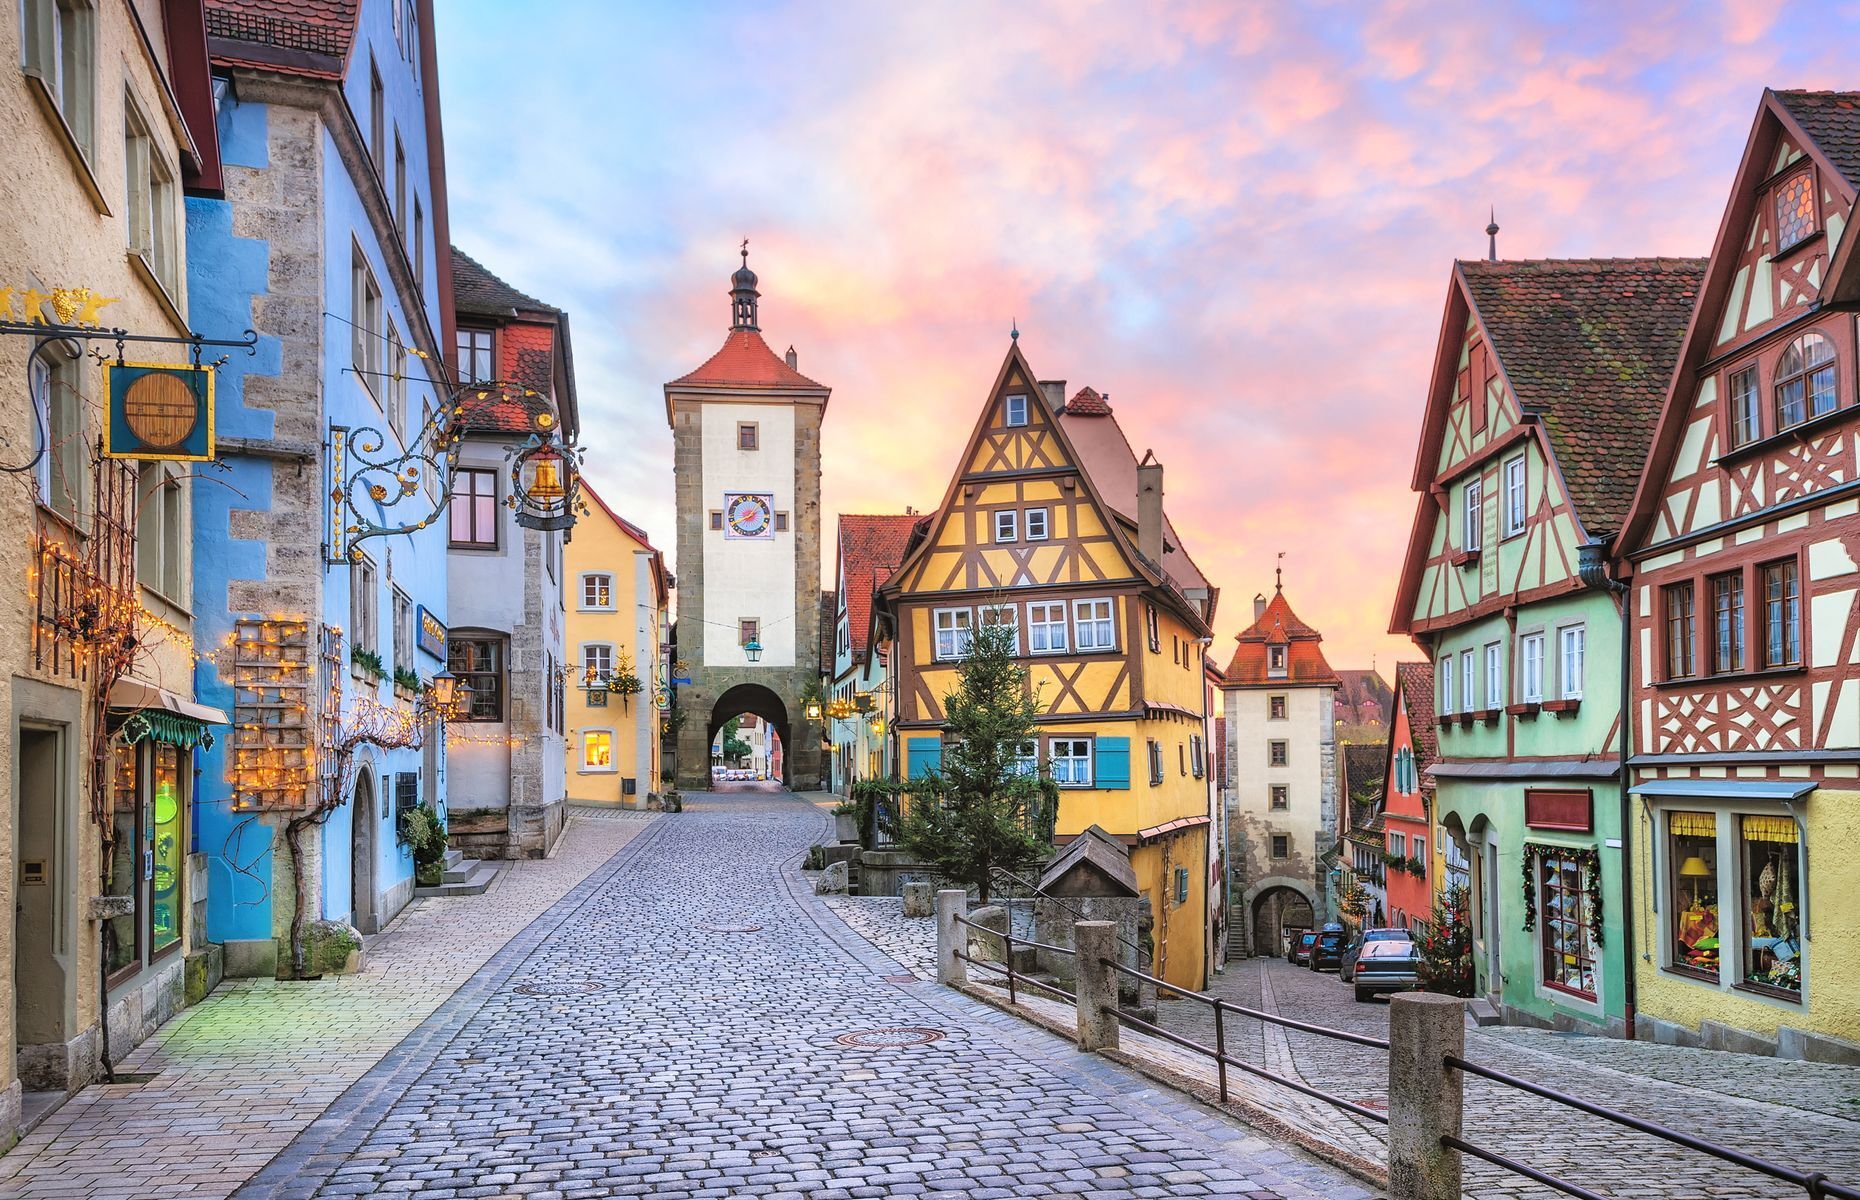 Located on the banks of the Tauber River, <a href="https://www.germany.travel/en/cities-culture/rothenburg.html" rel="noreferrer noopener">Rothenburg</a> is one of the best-preserved medieval towns in Europe. In addition to Marktplatz and the town hall, stop by Plönlein, an iconic site straight out of a fairy tale. Rothenburg is also a must-see for those planning to travel the German Romantic Road.